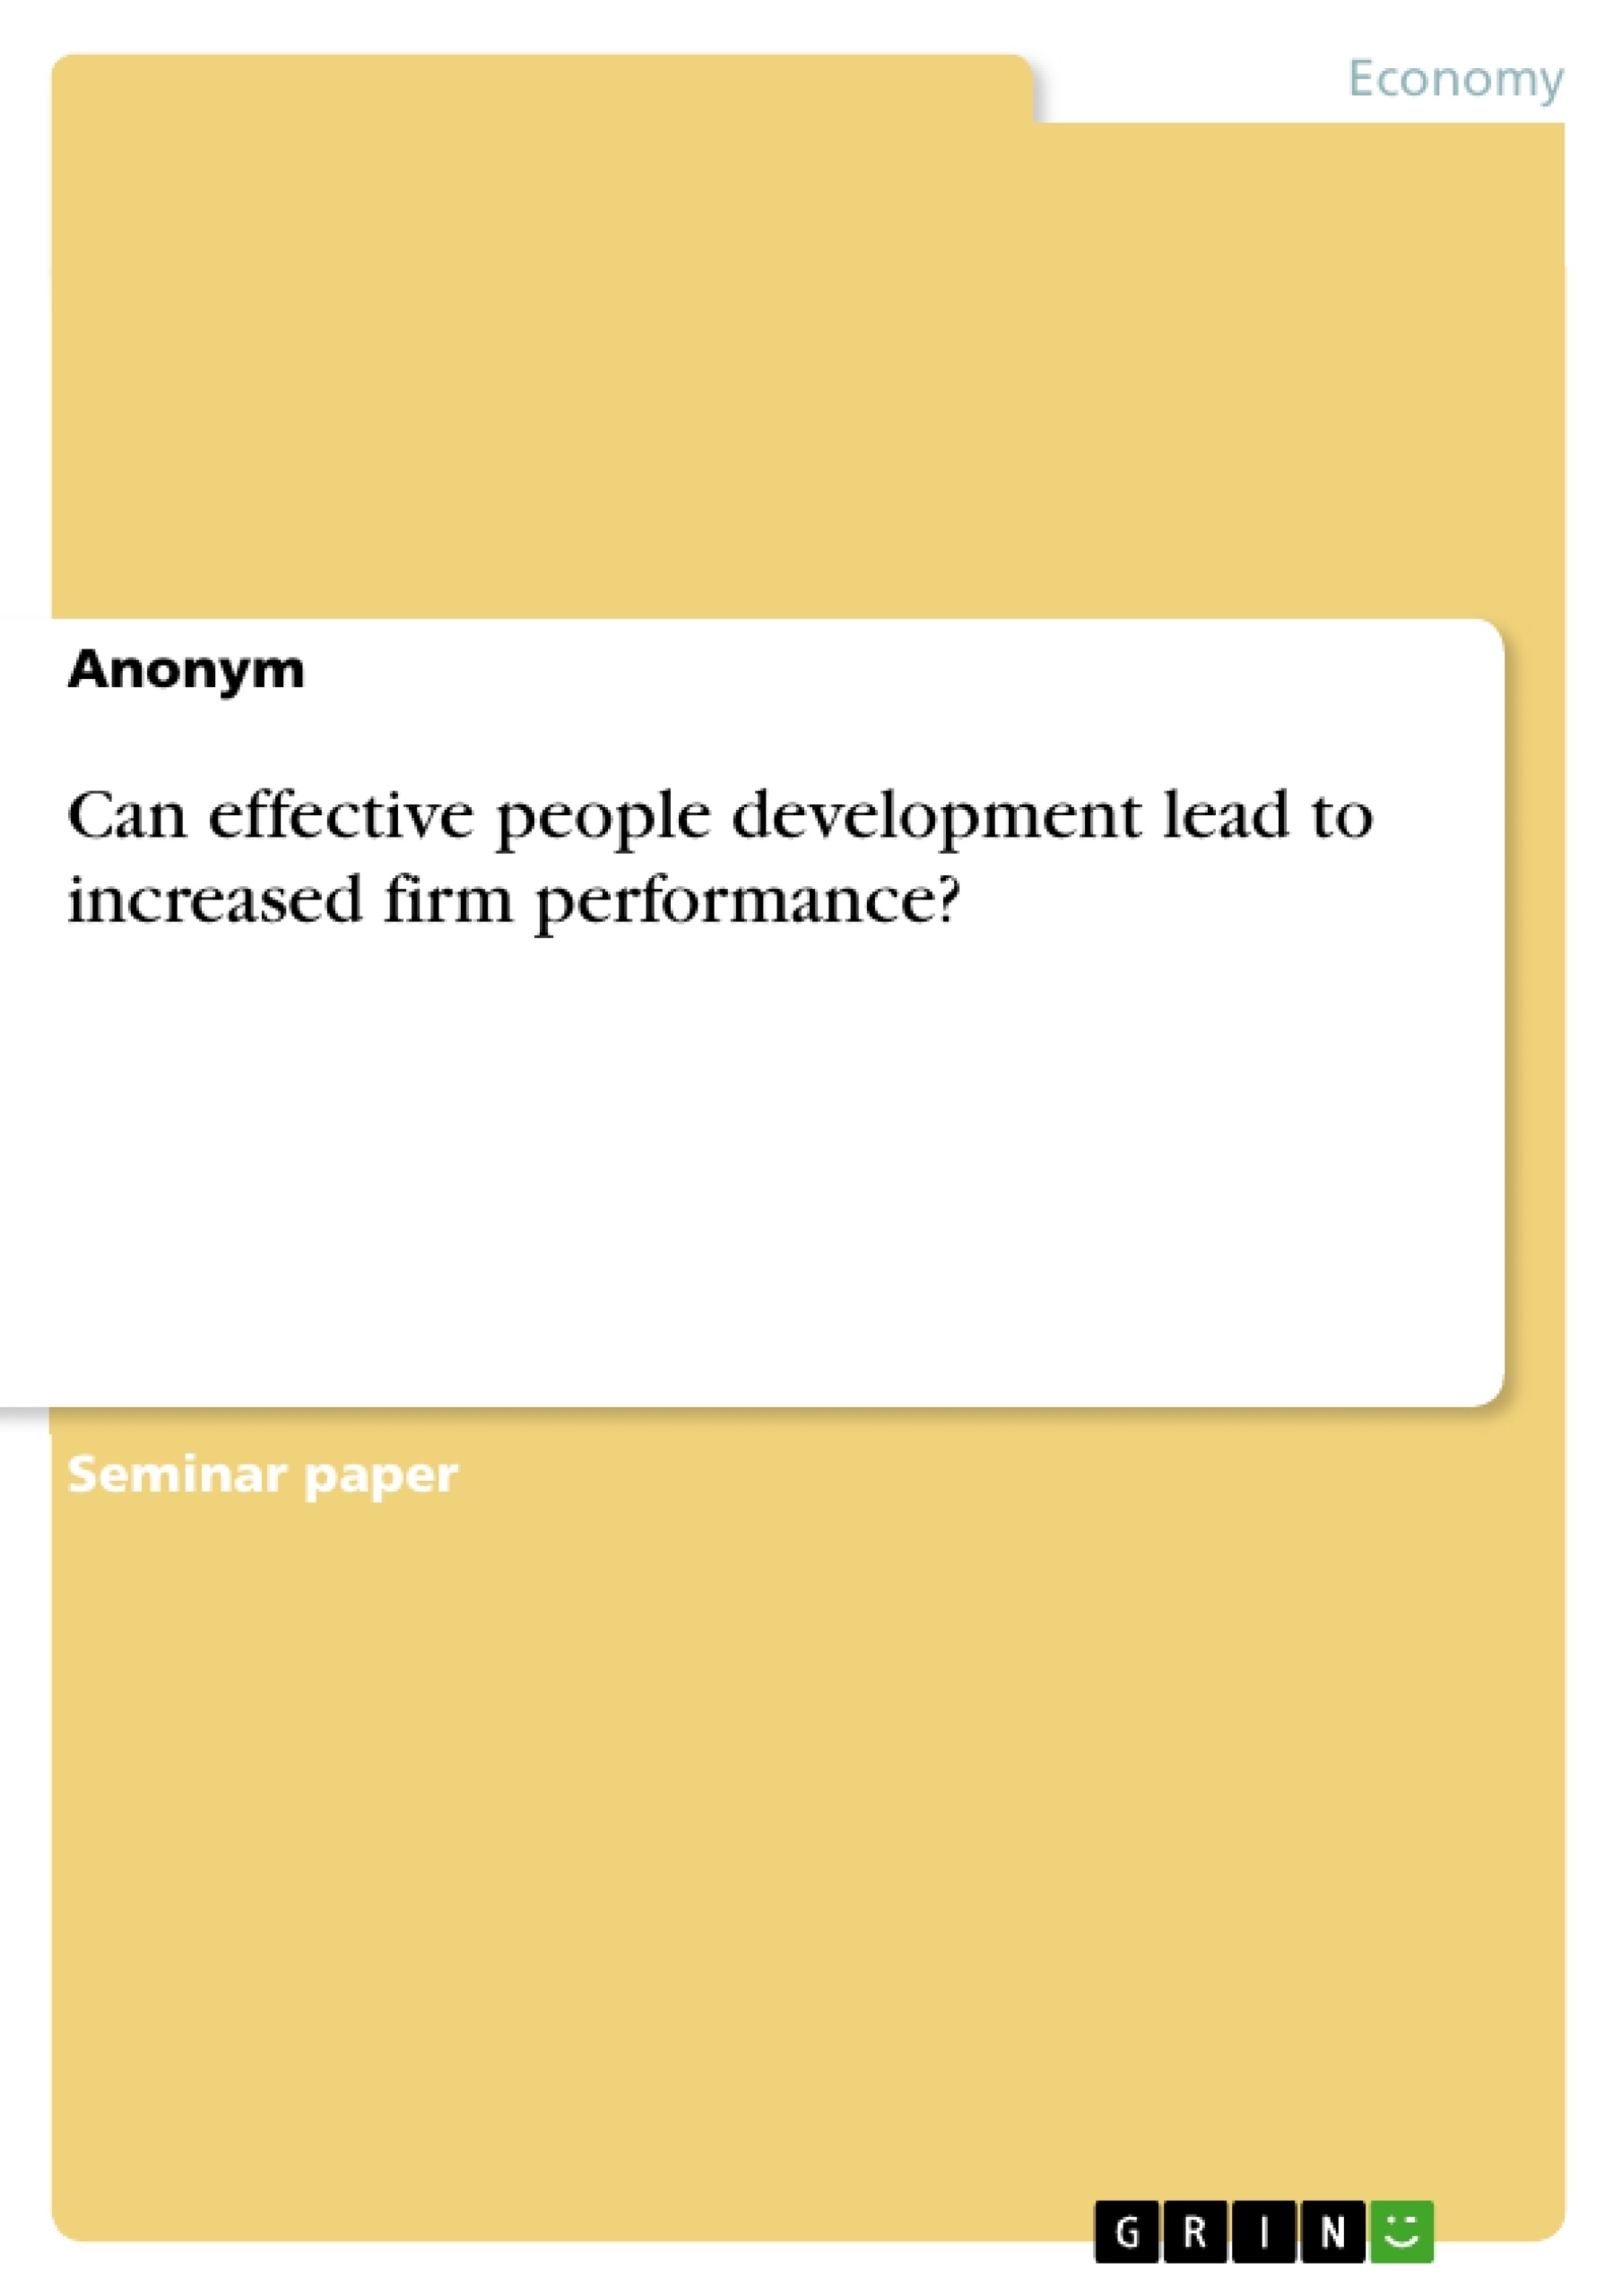 Title: Can effective people development lead to increased firm performance?